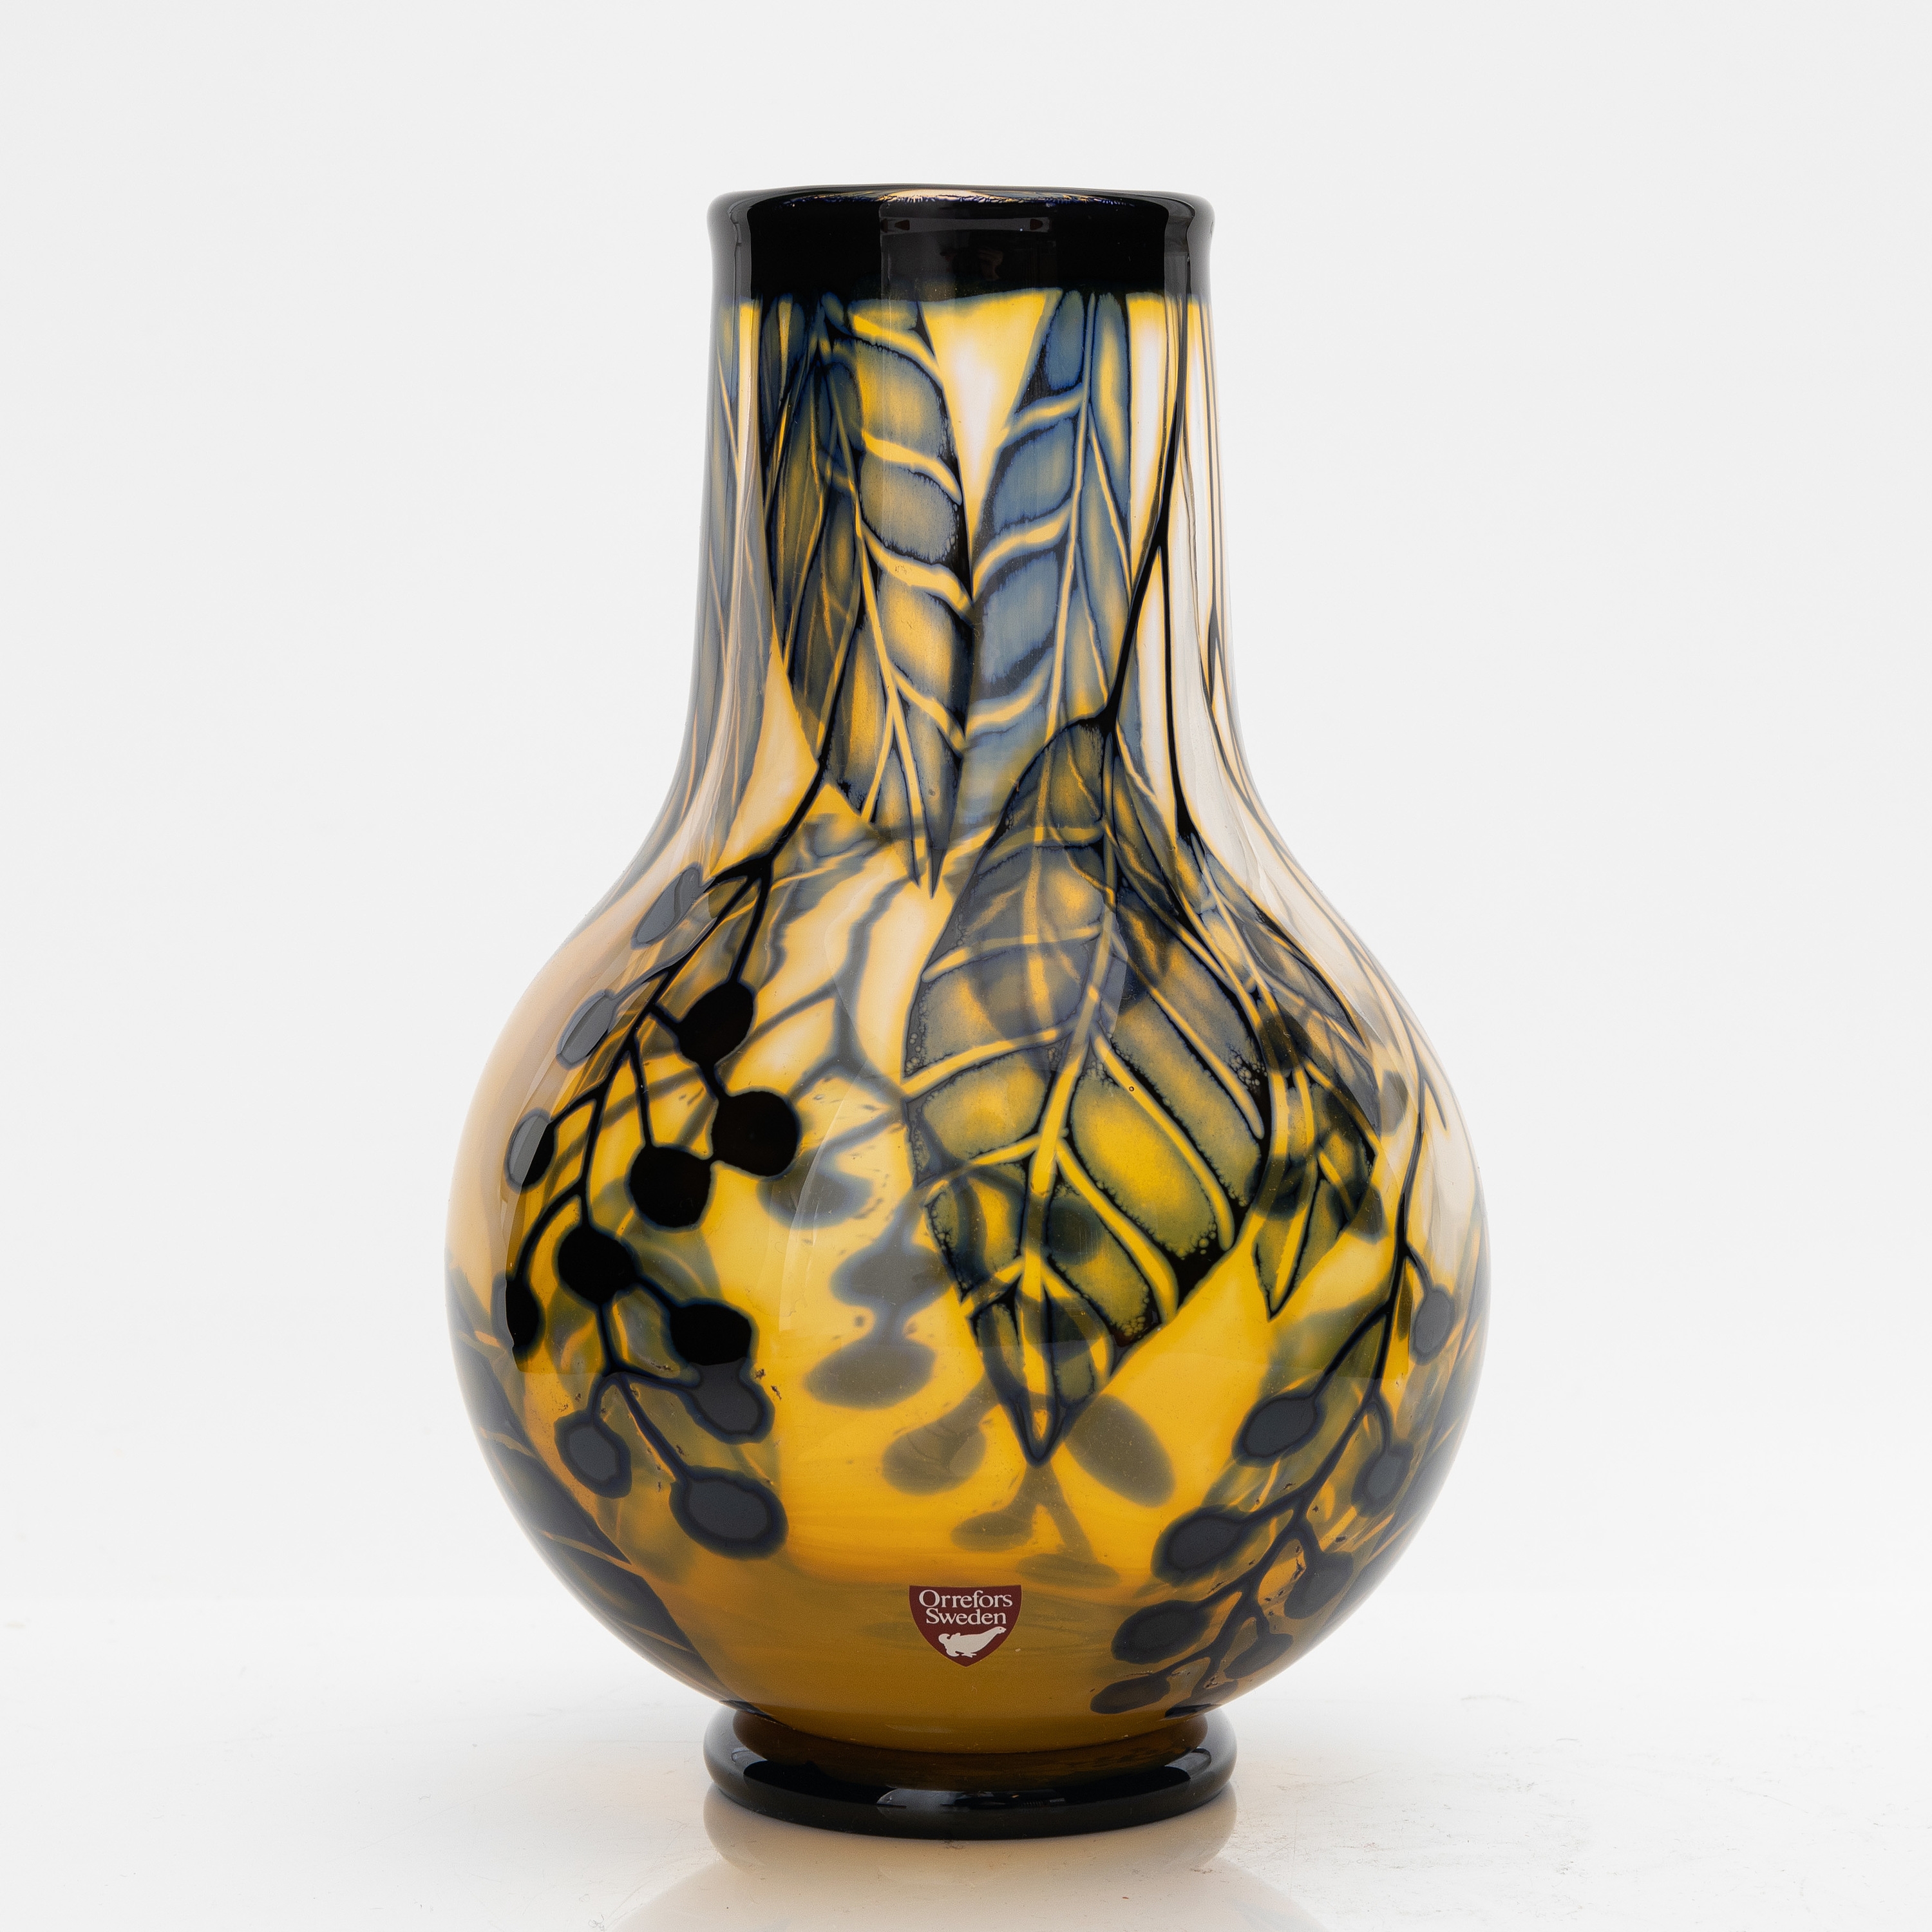 a graal glass vase, -orrefors, signed and dated 1983 by Eva Englund, dated 1983